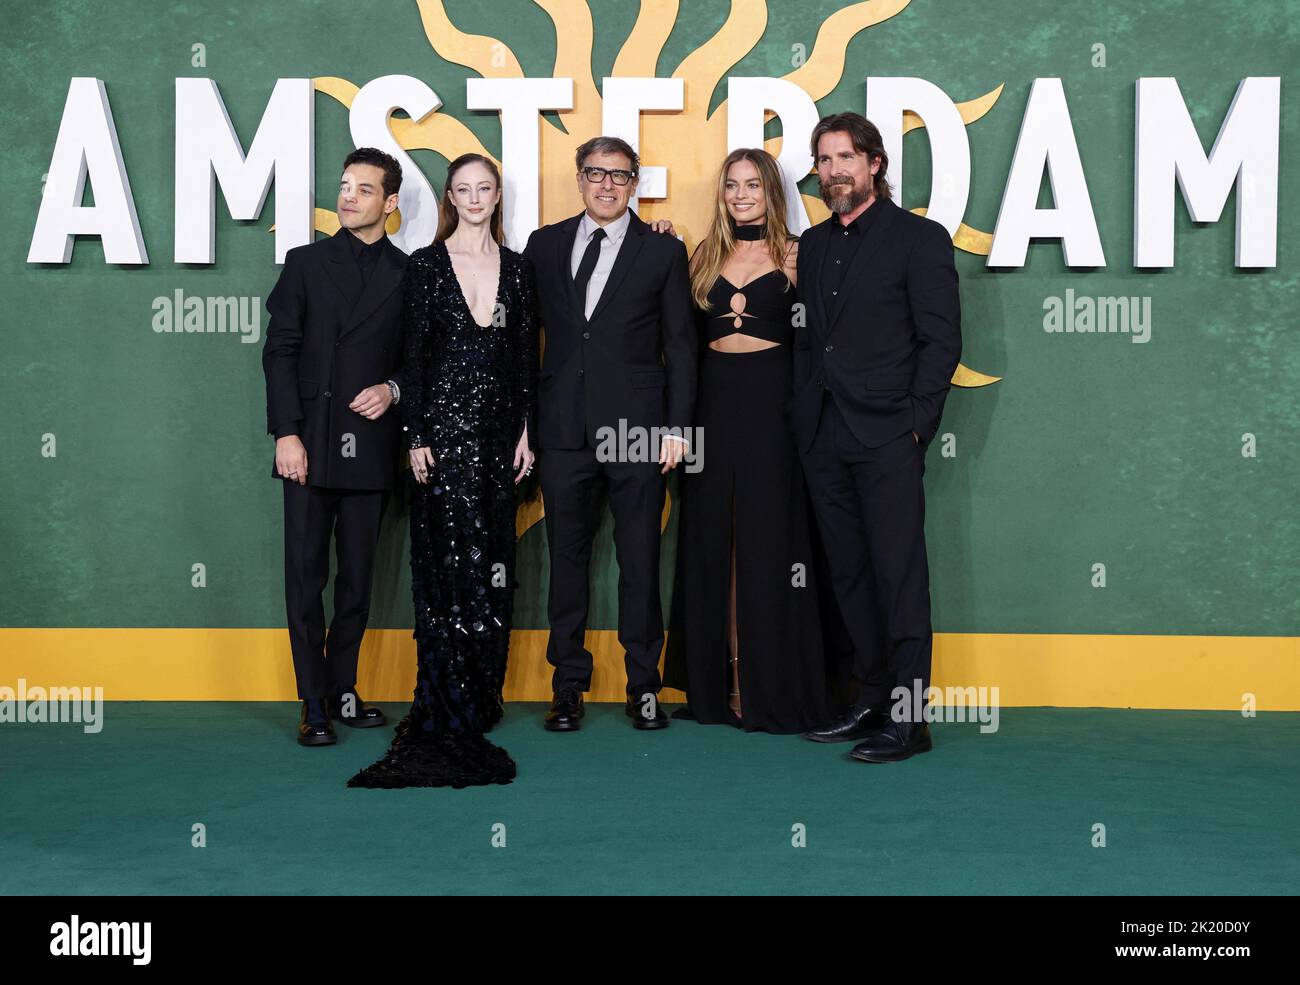 Director David O. Russell with cast members Rami Malek, Andrea Riseborough, Margot Robbie and Christian Bale attend the European premiere of the film 'Amsterdam', in London, Britain September 21, 2022. REUTERS/Tom Nicholson Stock Photo